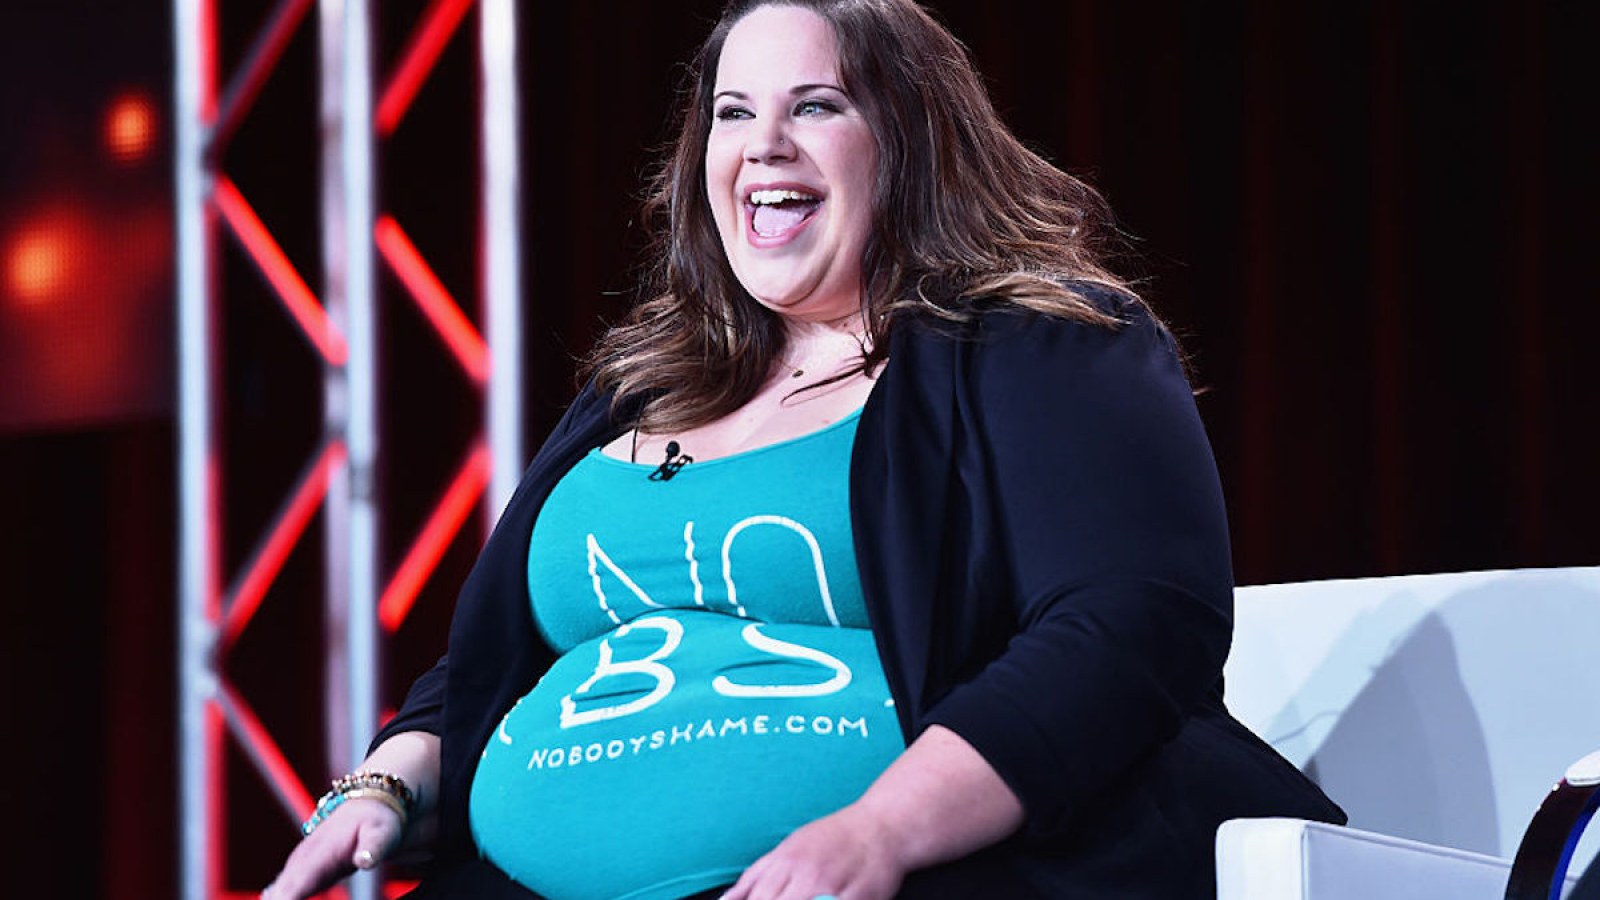 Whitney Way Thore Wallpapers